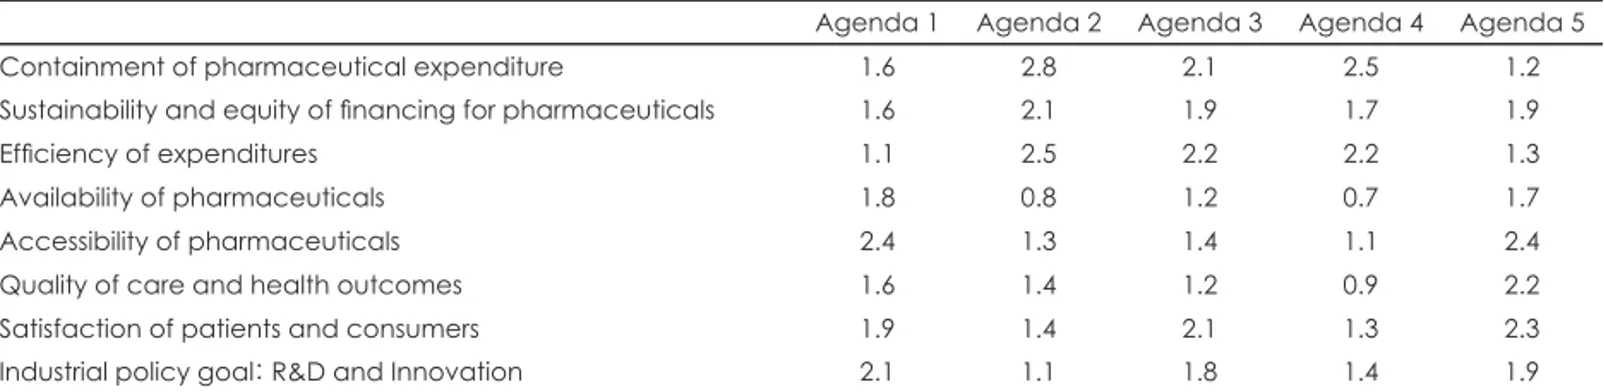 Table 5. Impact score by policy goals by agenda